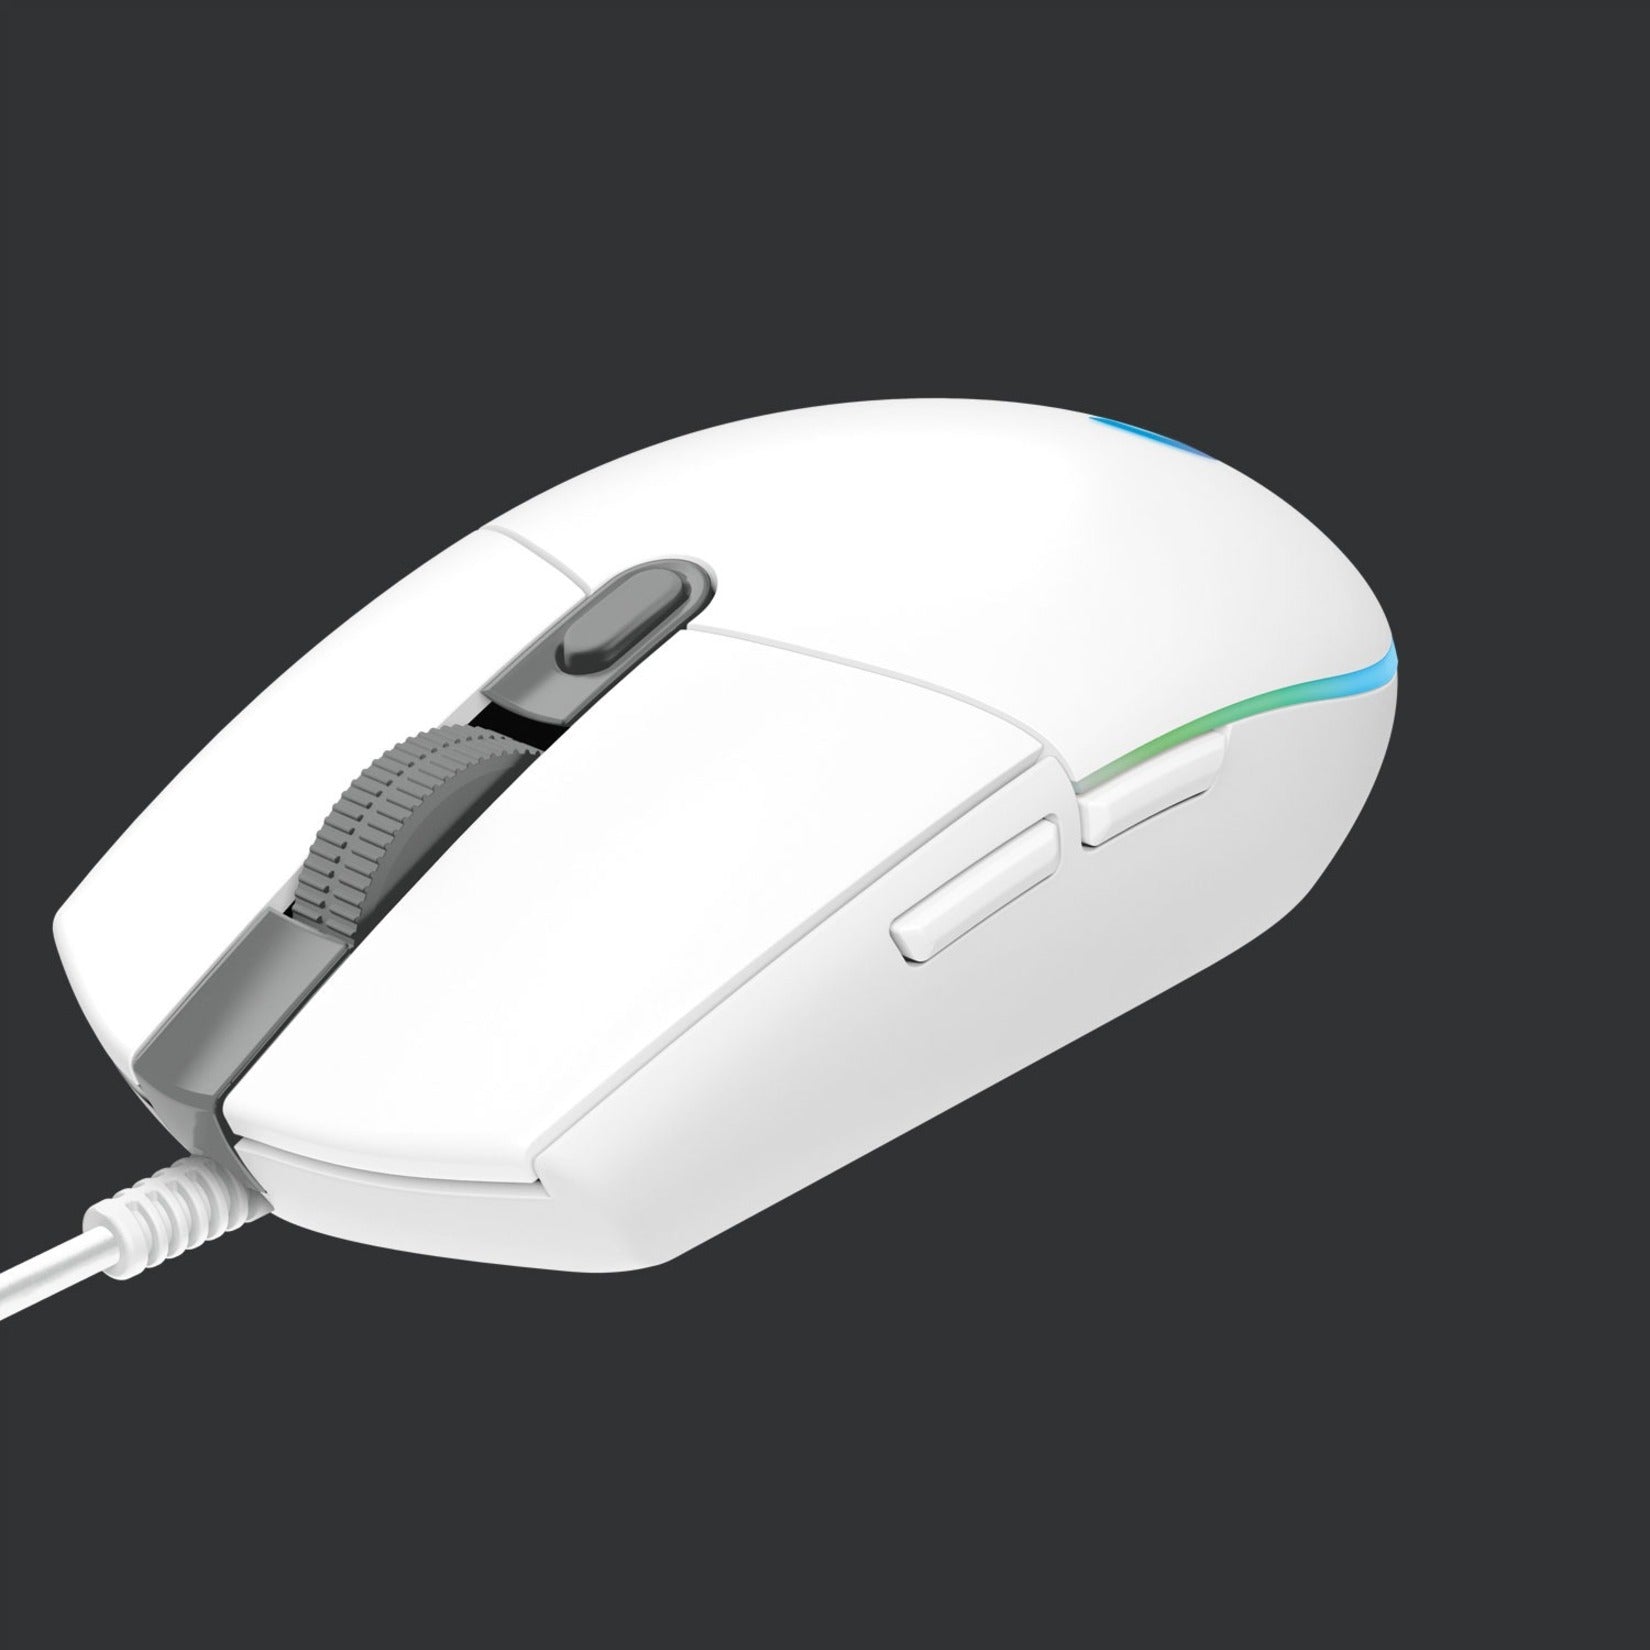 Logitech 910-005791 G203 Gaming Mouse, 6 Buttons, 8000 dpi, USB Wired, White